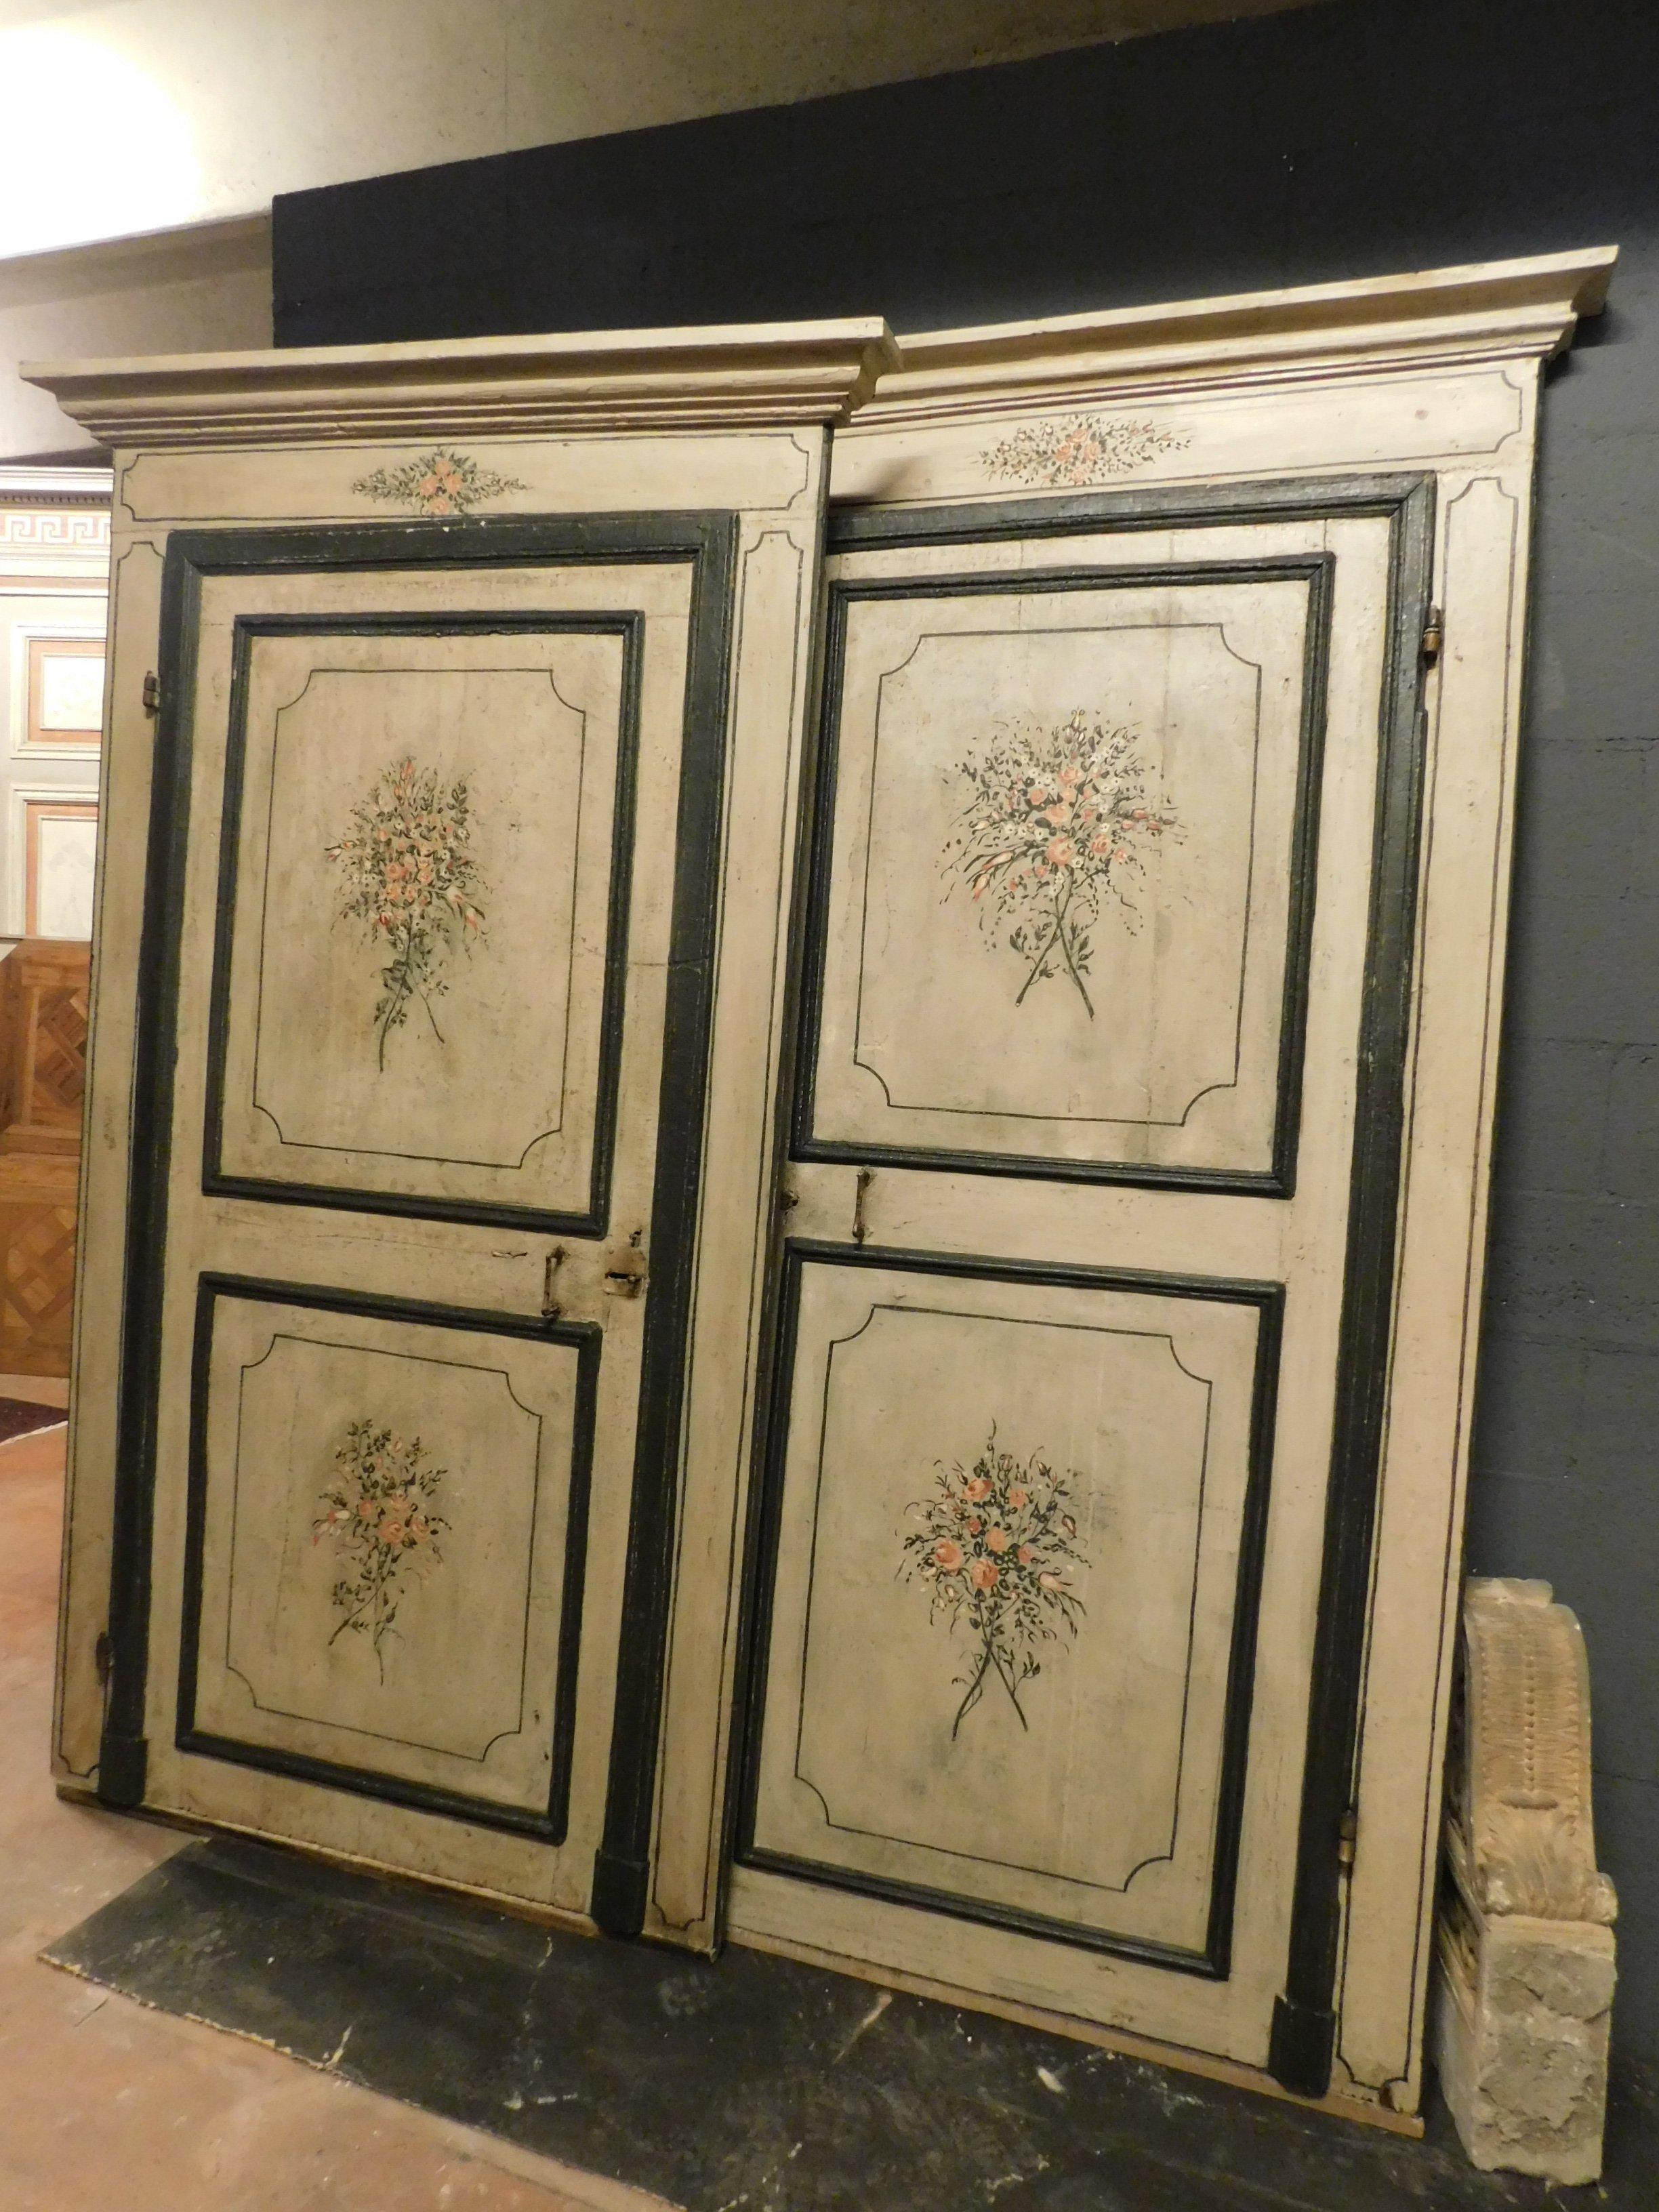 2 ancient lacquered doors with original frame, hand painted both the frame and the internal door, hand painted also the back of the door, Italian artist of the mid-18th century, come from a luxurious villa in the historic center of a country in